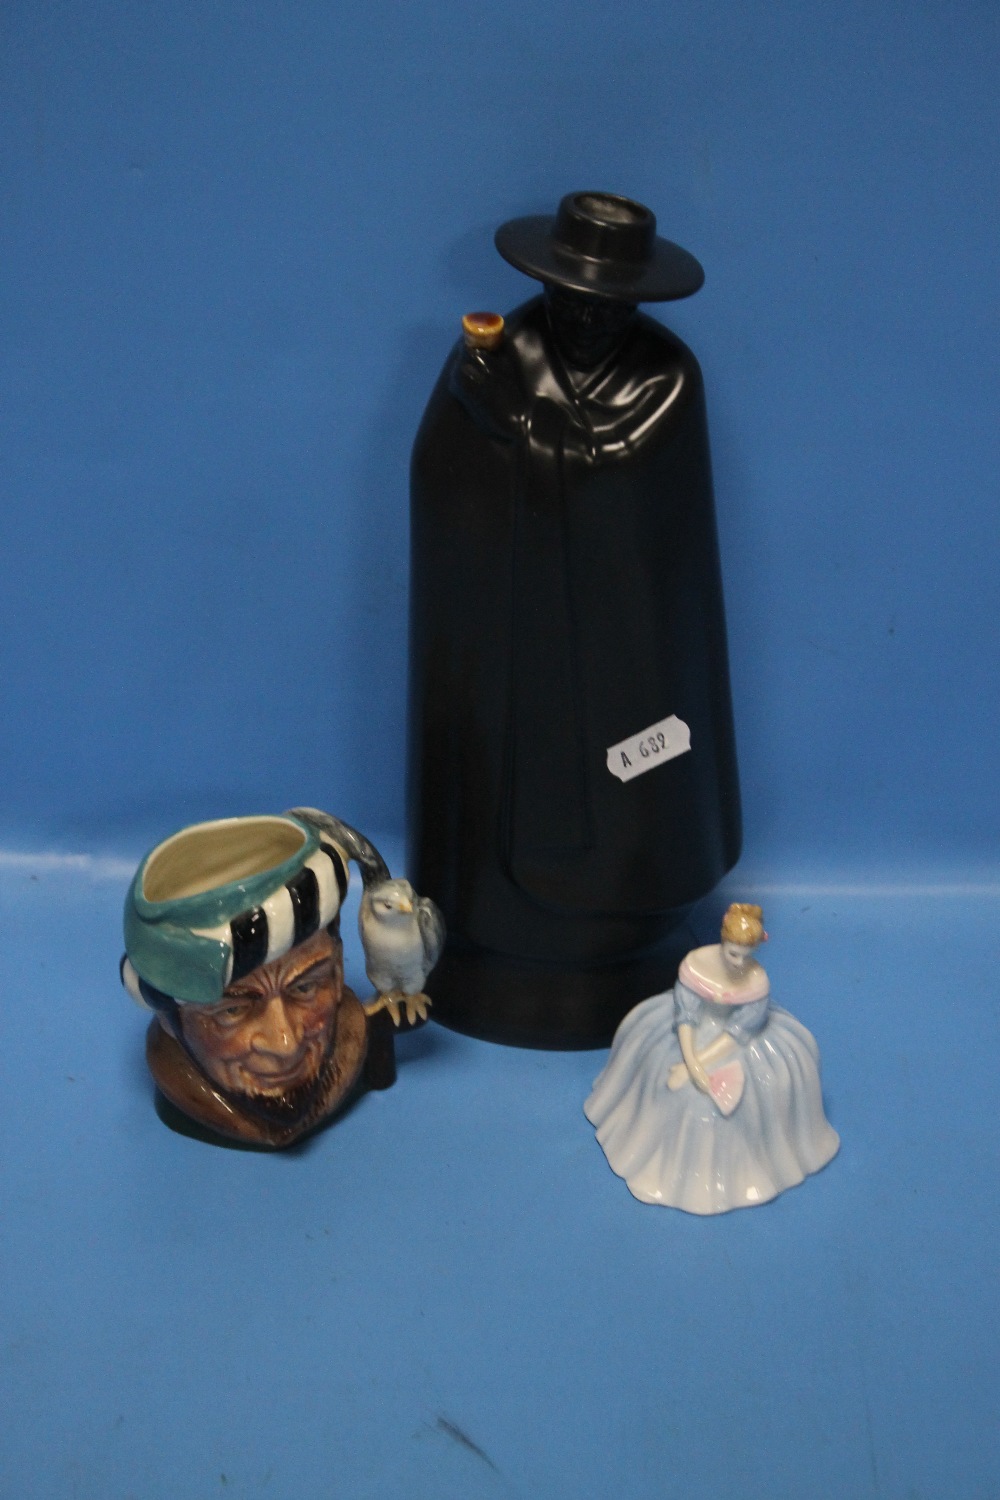 A MINIATURE ROYAL DOULTON FIGURINE OF VICTORIA, A WEDGWOOD DECANTER AND A MINIATURE CHARACTER JUG